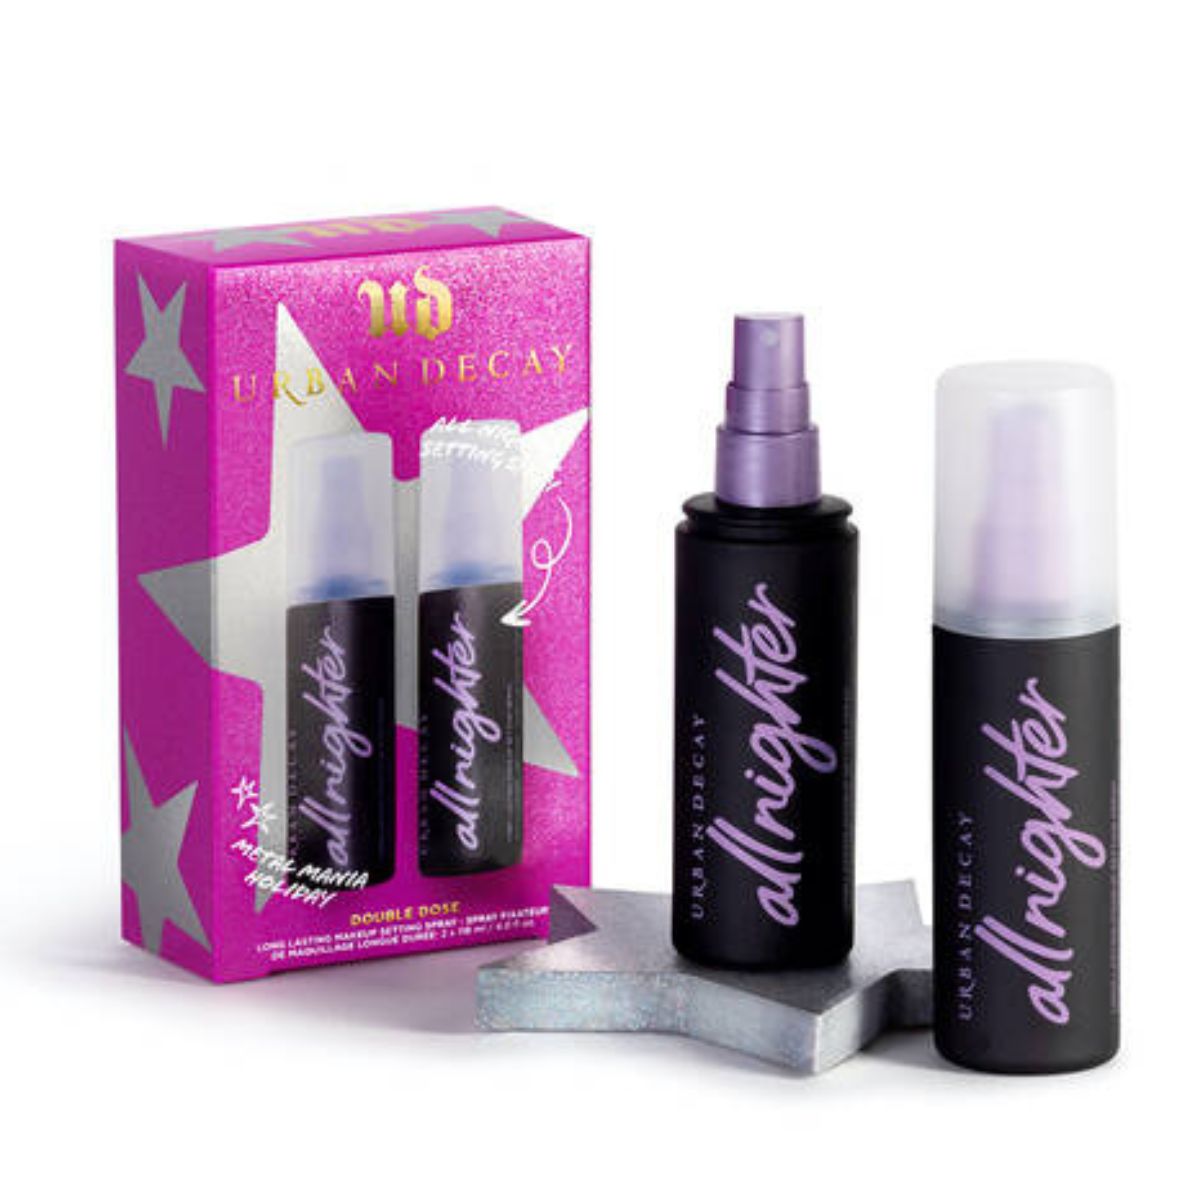 Urban Decay Double Dose Duo Gift Set